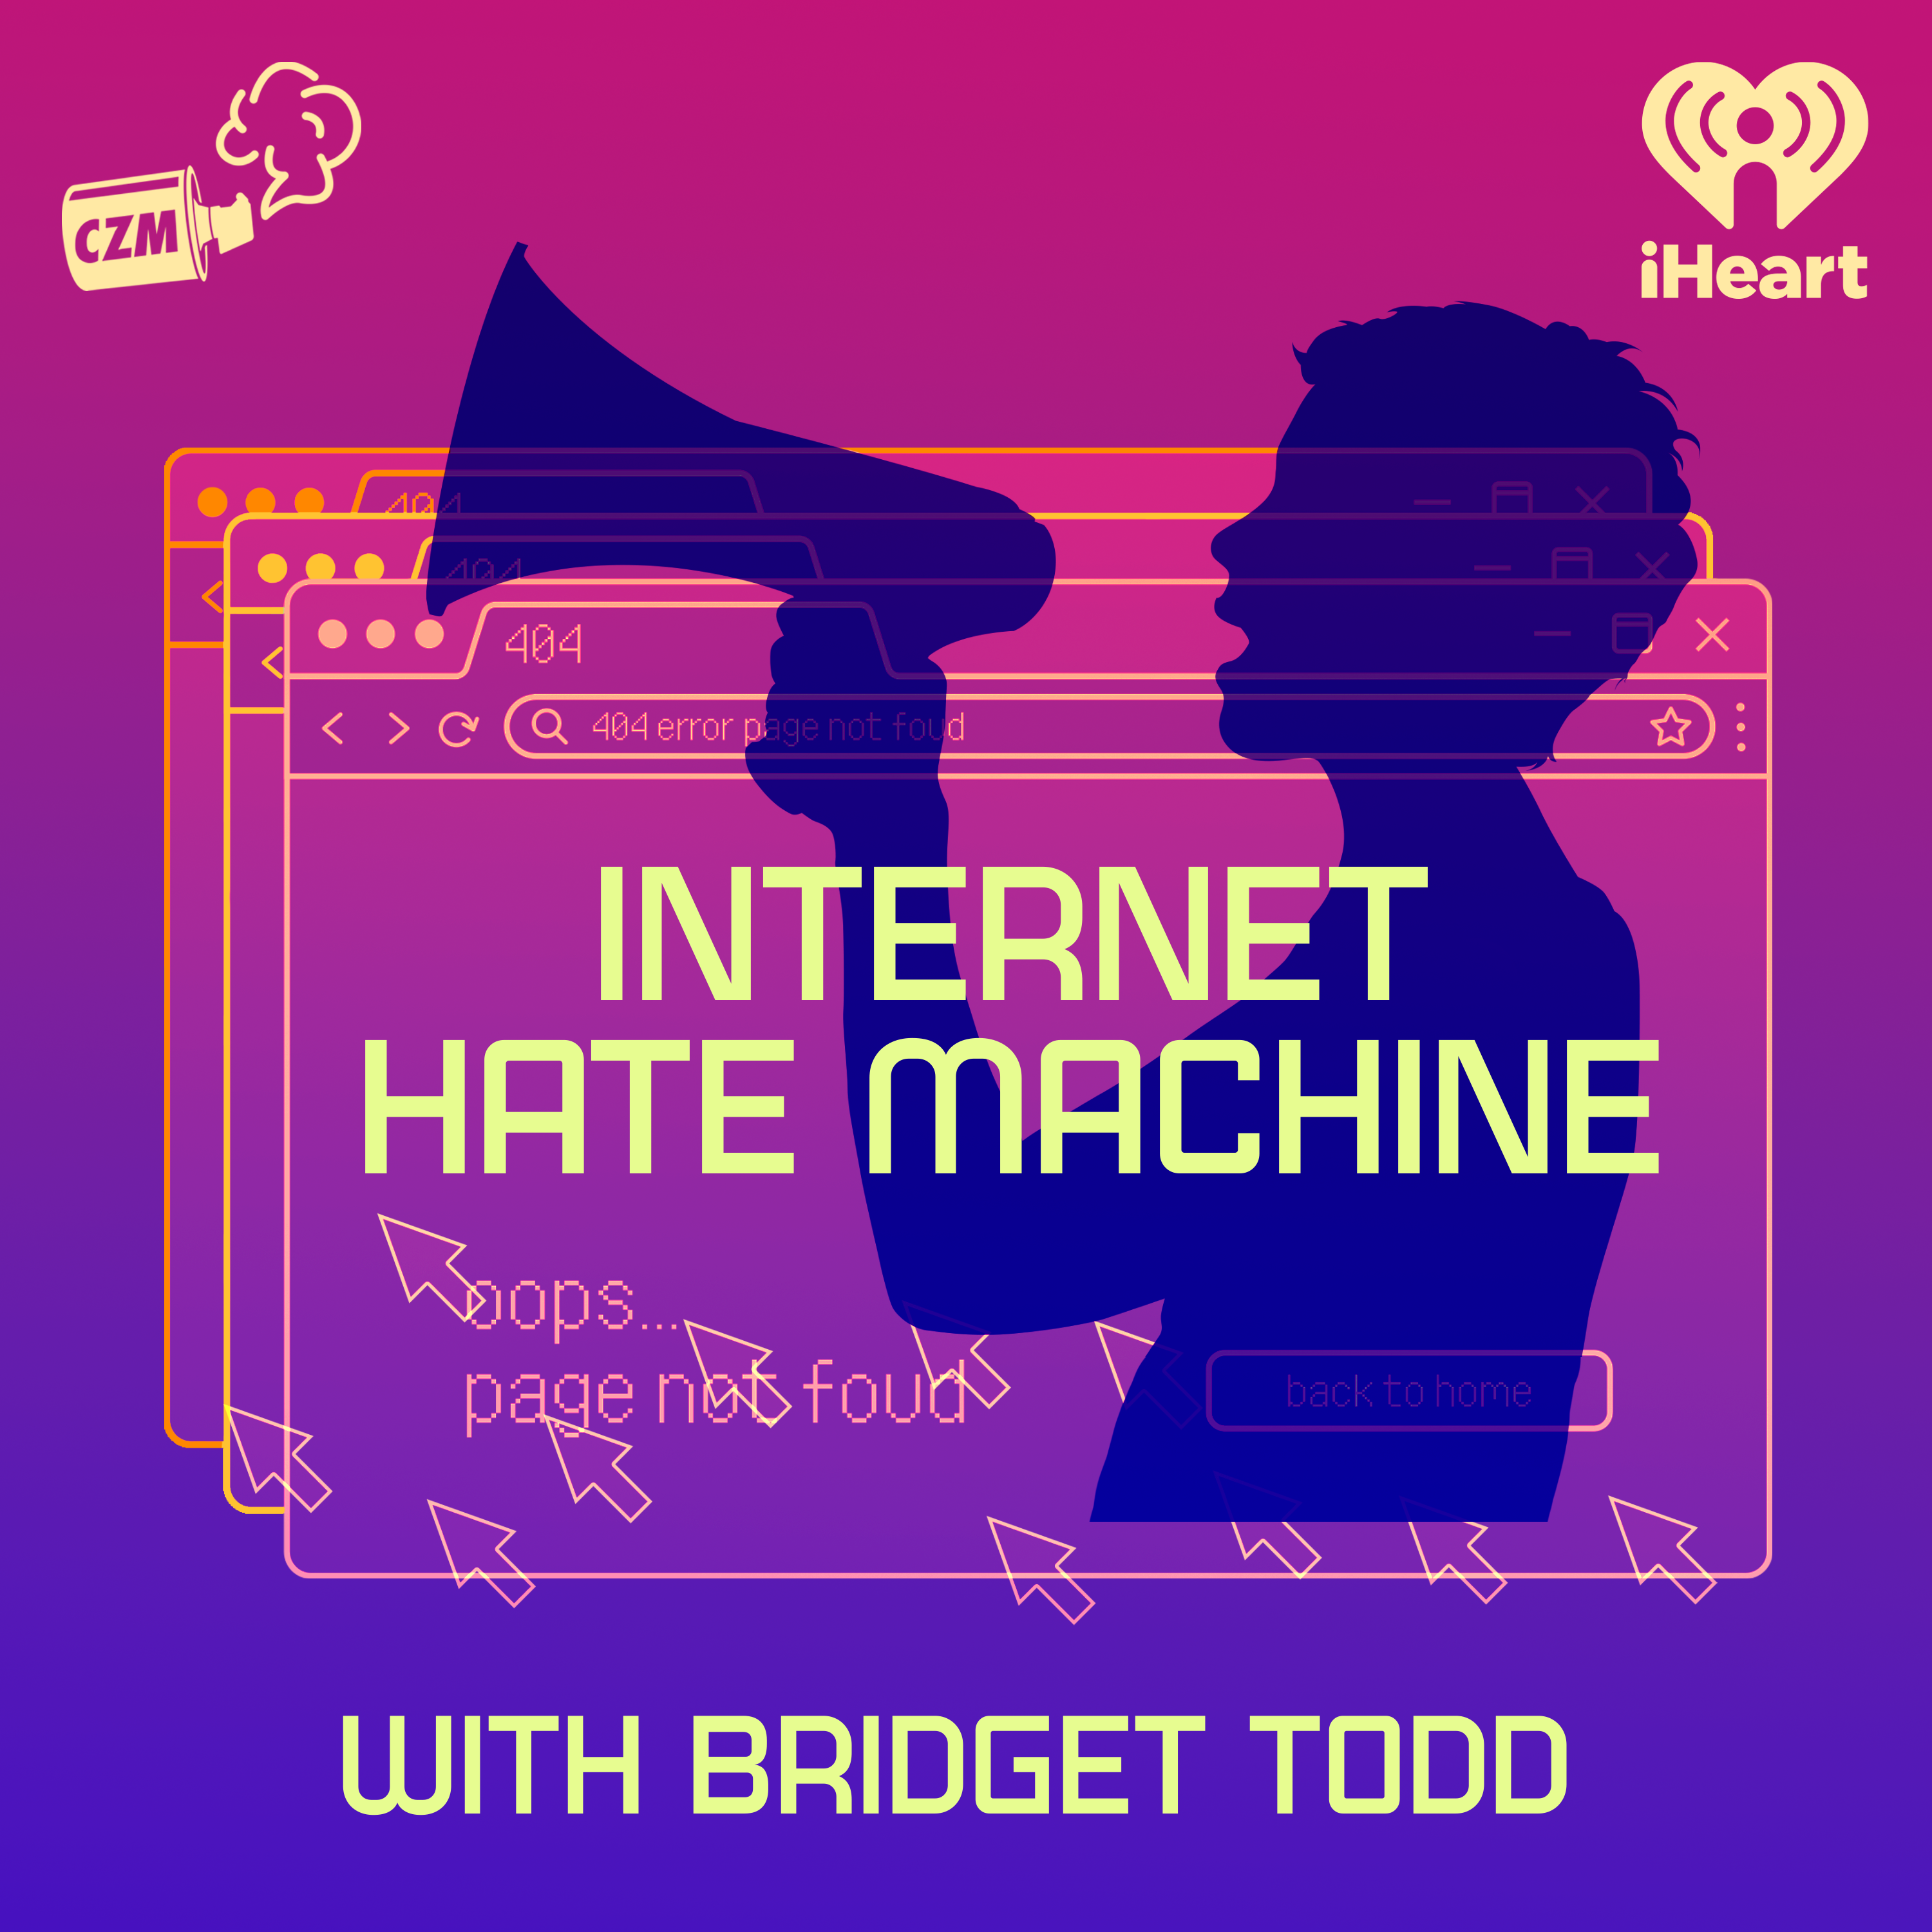 Internet Hate Machine May Be Over,  But The Conversation Continues